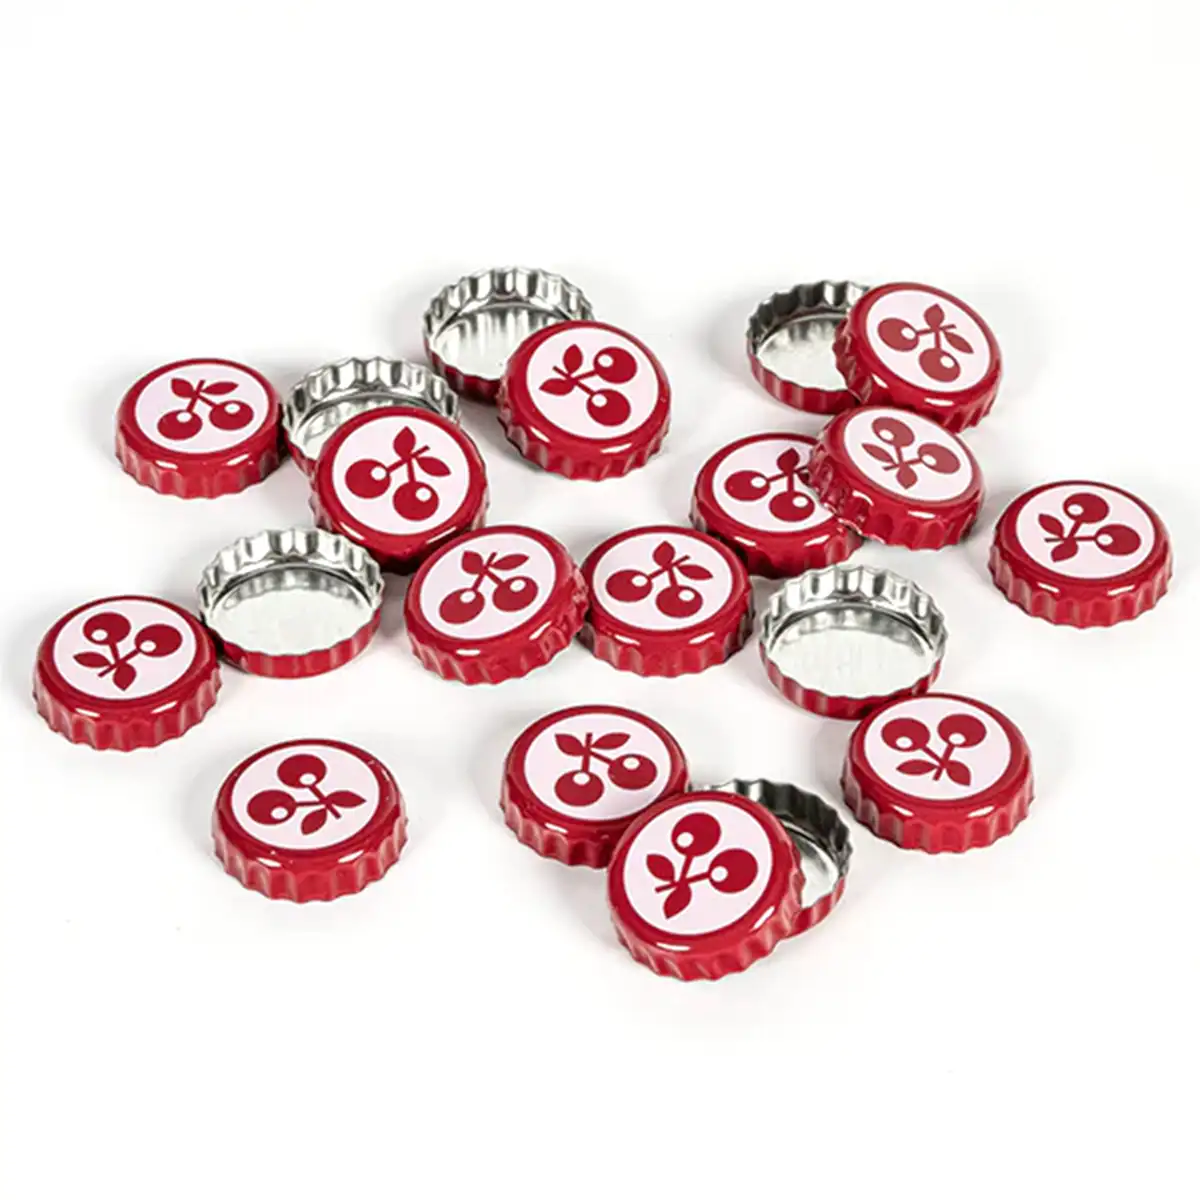 Fallout Bottle Cap Series "Nuka Cola Cherry" with Collection Tin Image 6